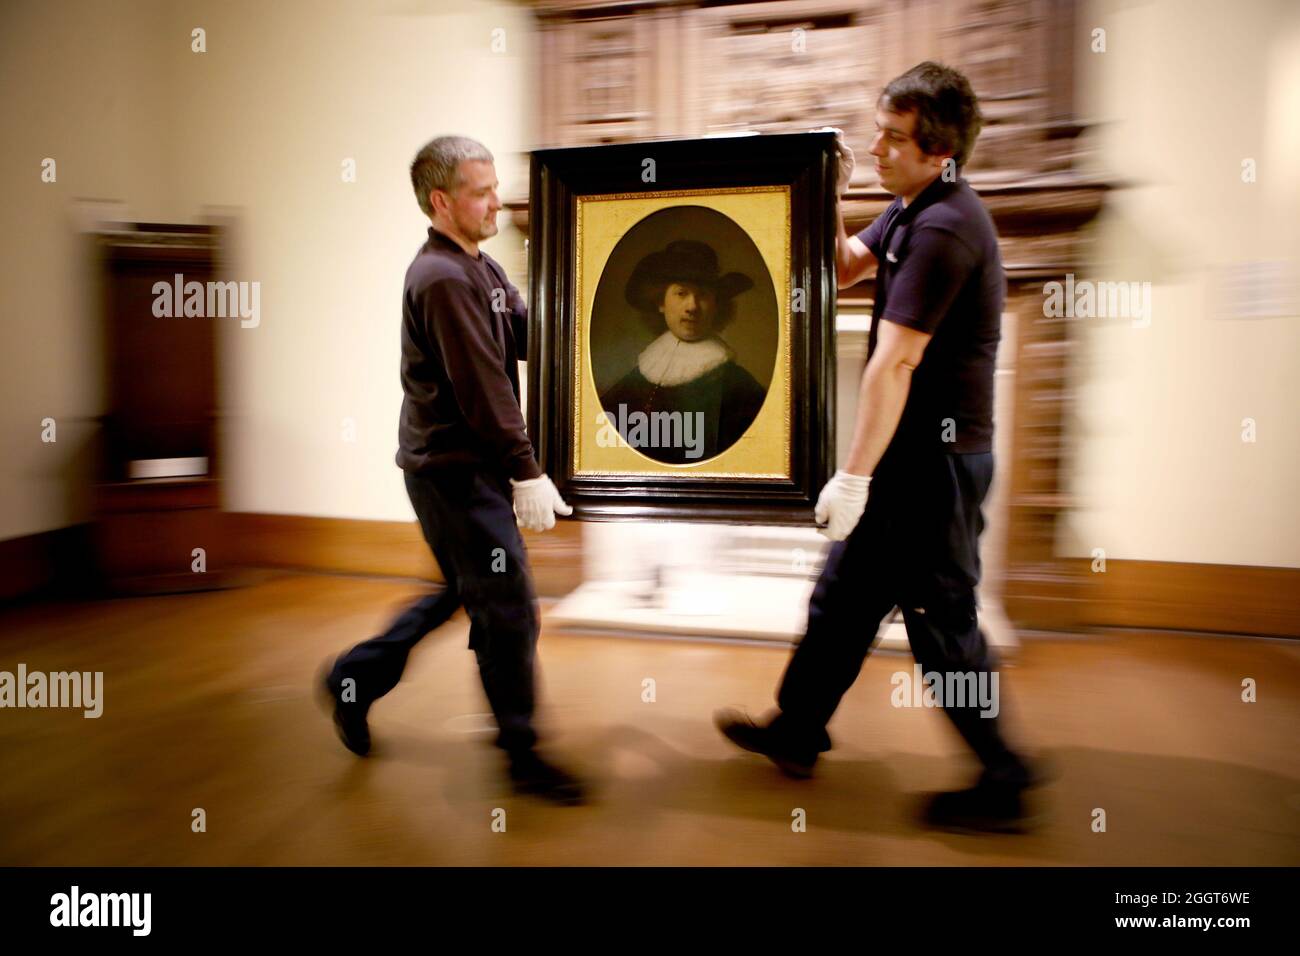 File photo dated 06/04/17 art technicians Andy Cavanagh (left) and Paul McCall moving a painting entitled 'Self Portrait' (1632) by Rembrandt at the Burrell Collection, Glasgow prior to the museum renovation. An art collection amassed by a shipping magnate is to go back on show to the public in March next year after a £68.25 million museum renovation. Issue date: Friday September 3, 2021. Stock Photo